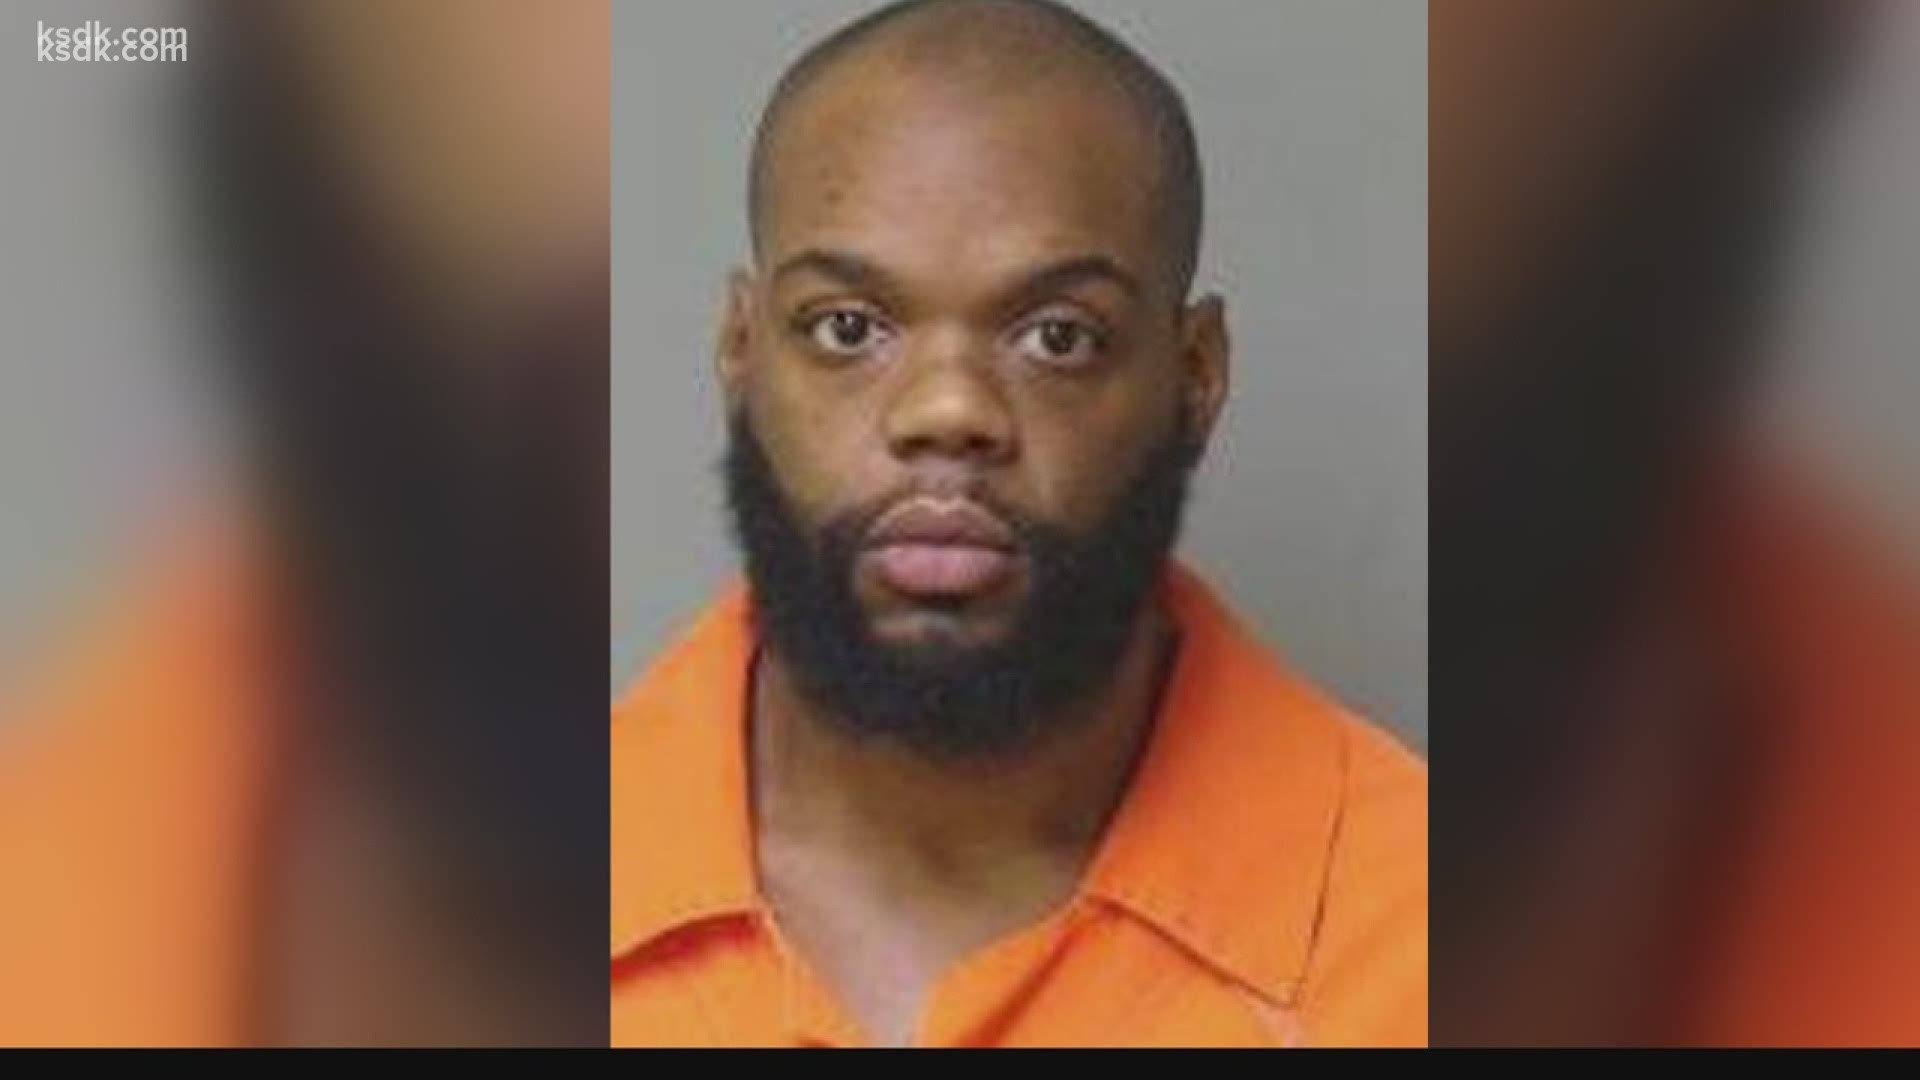 Two hours before former teacher Deonte Taylor was to accept a plea deal, he changed his mind. He faces sodomy, murder conspiracy & reckless HIV transmission charges.